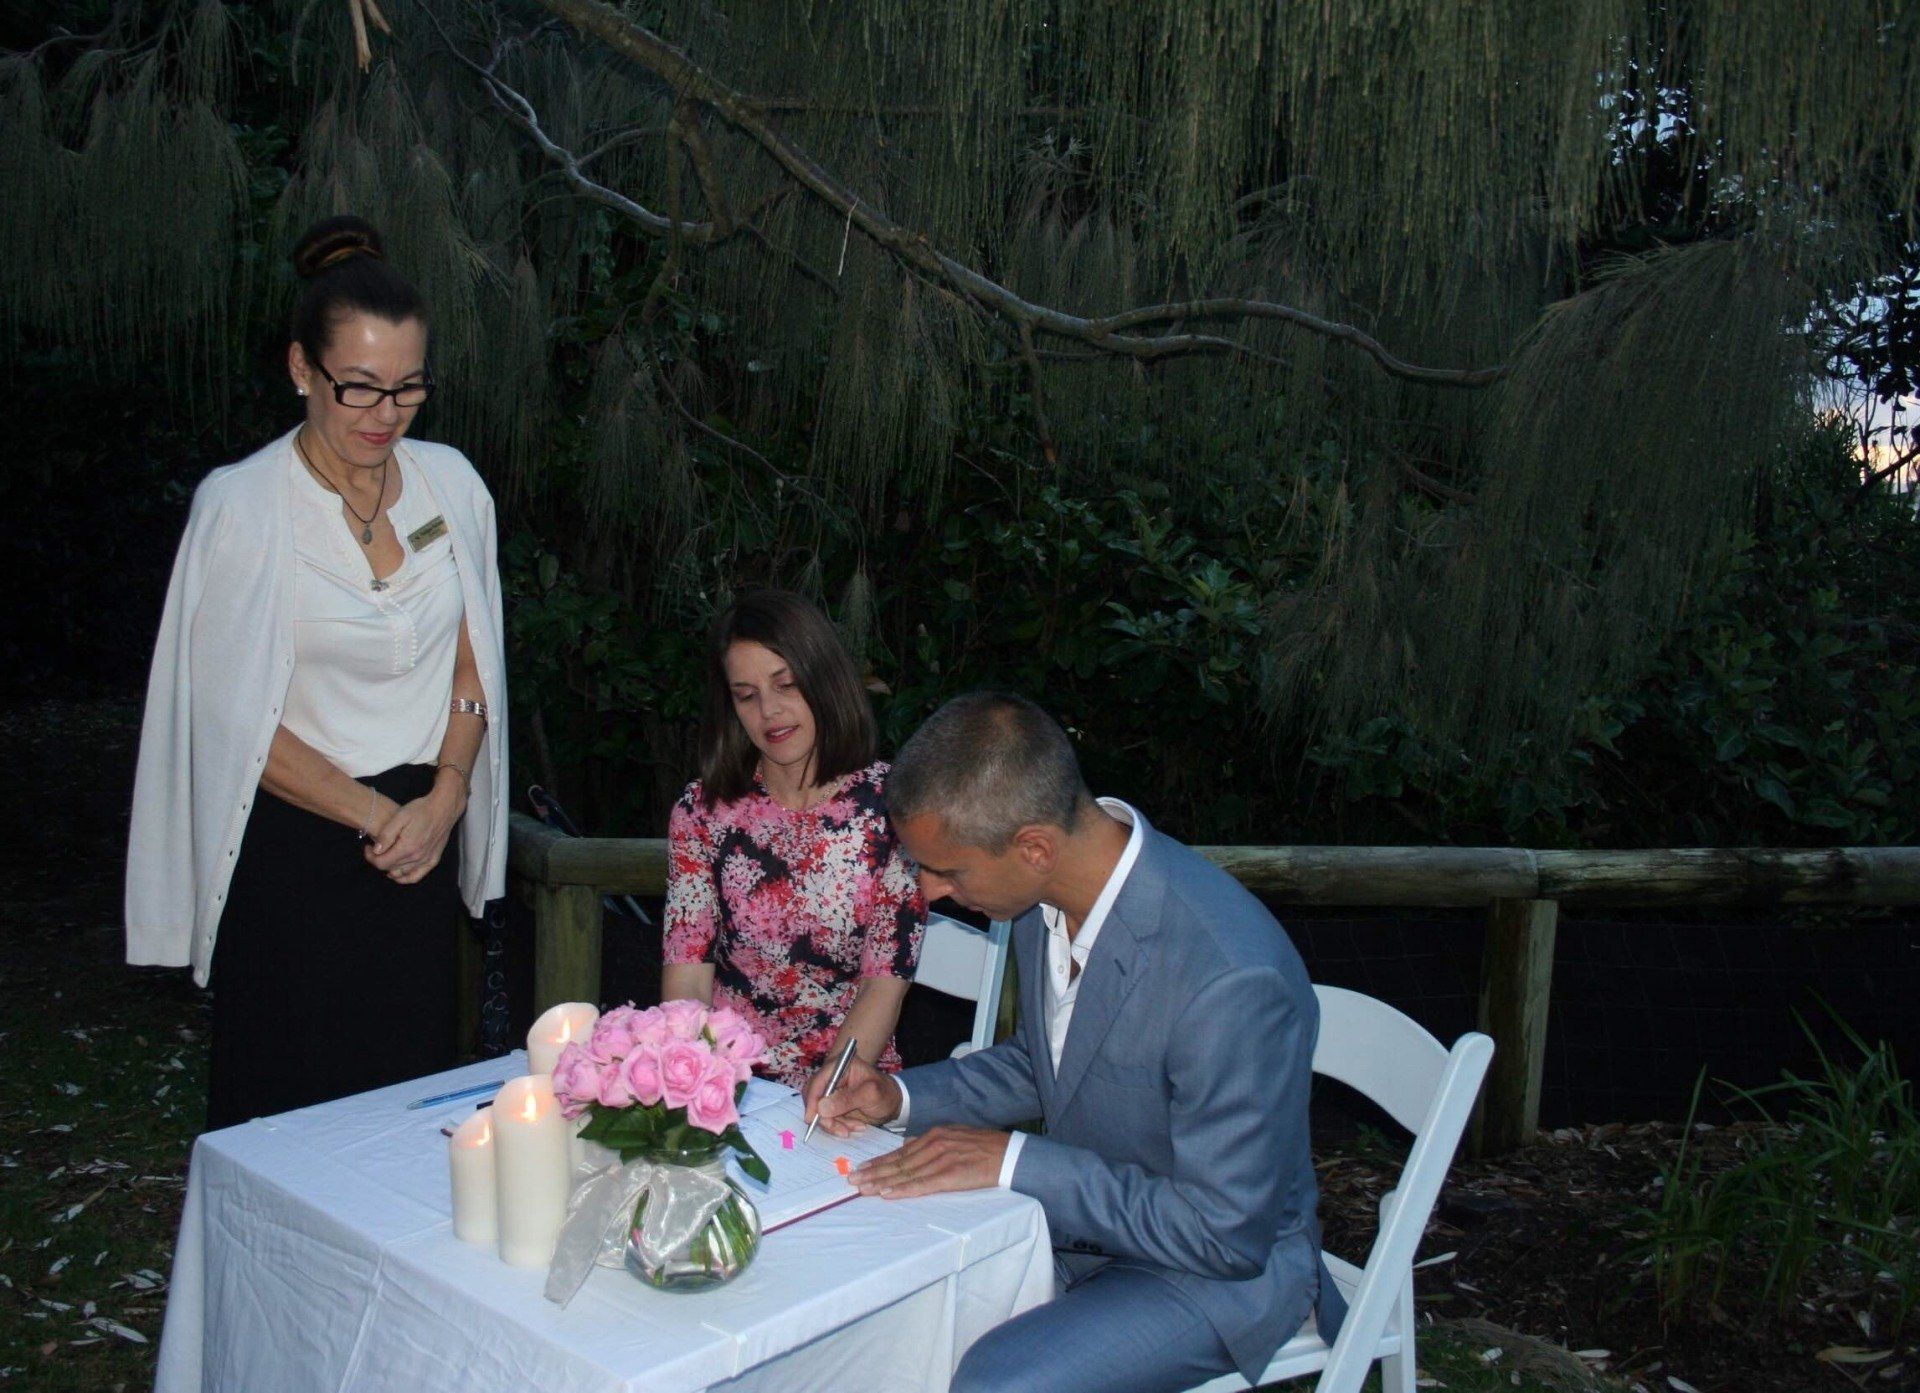 night wedding at Noosa main beach, pink flowers on table and candles , celebrant in black and white